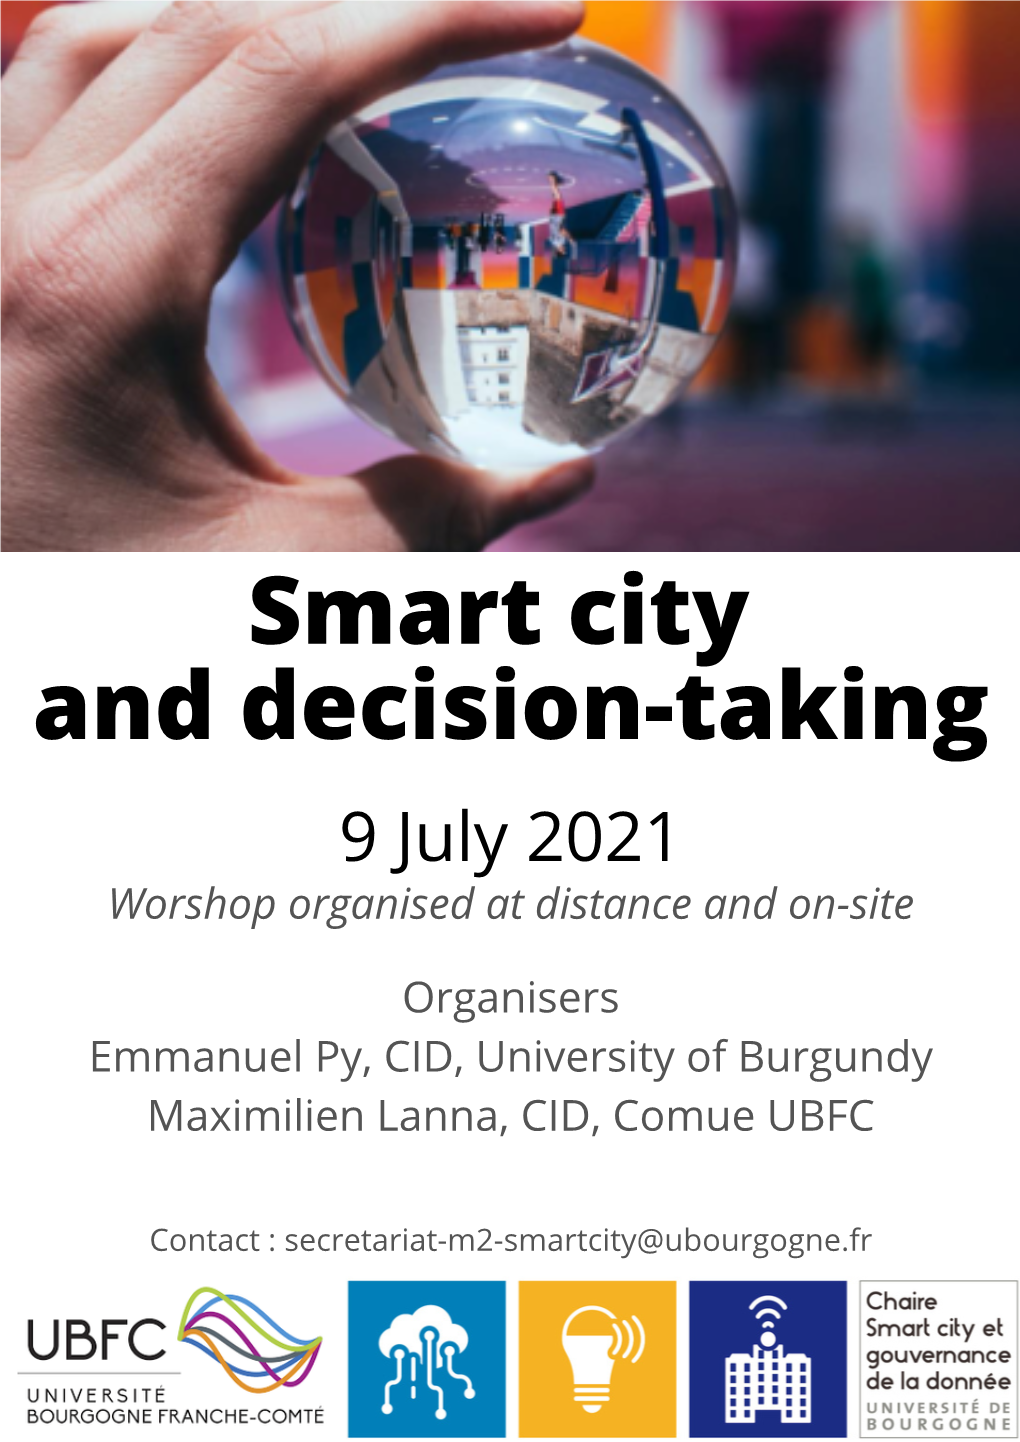 Smart City and Decision-Taking 9 July 2021 Worshop Organised at Distance and On-Site